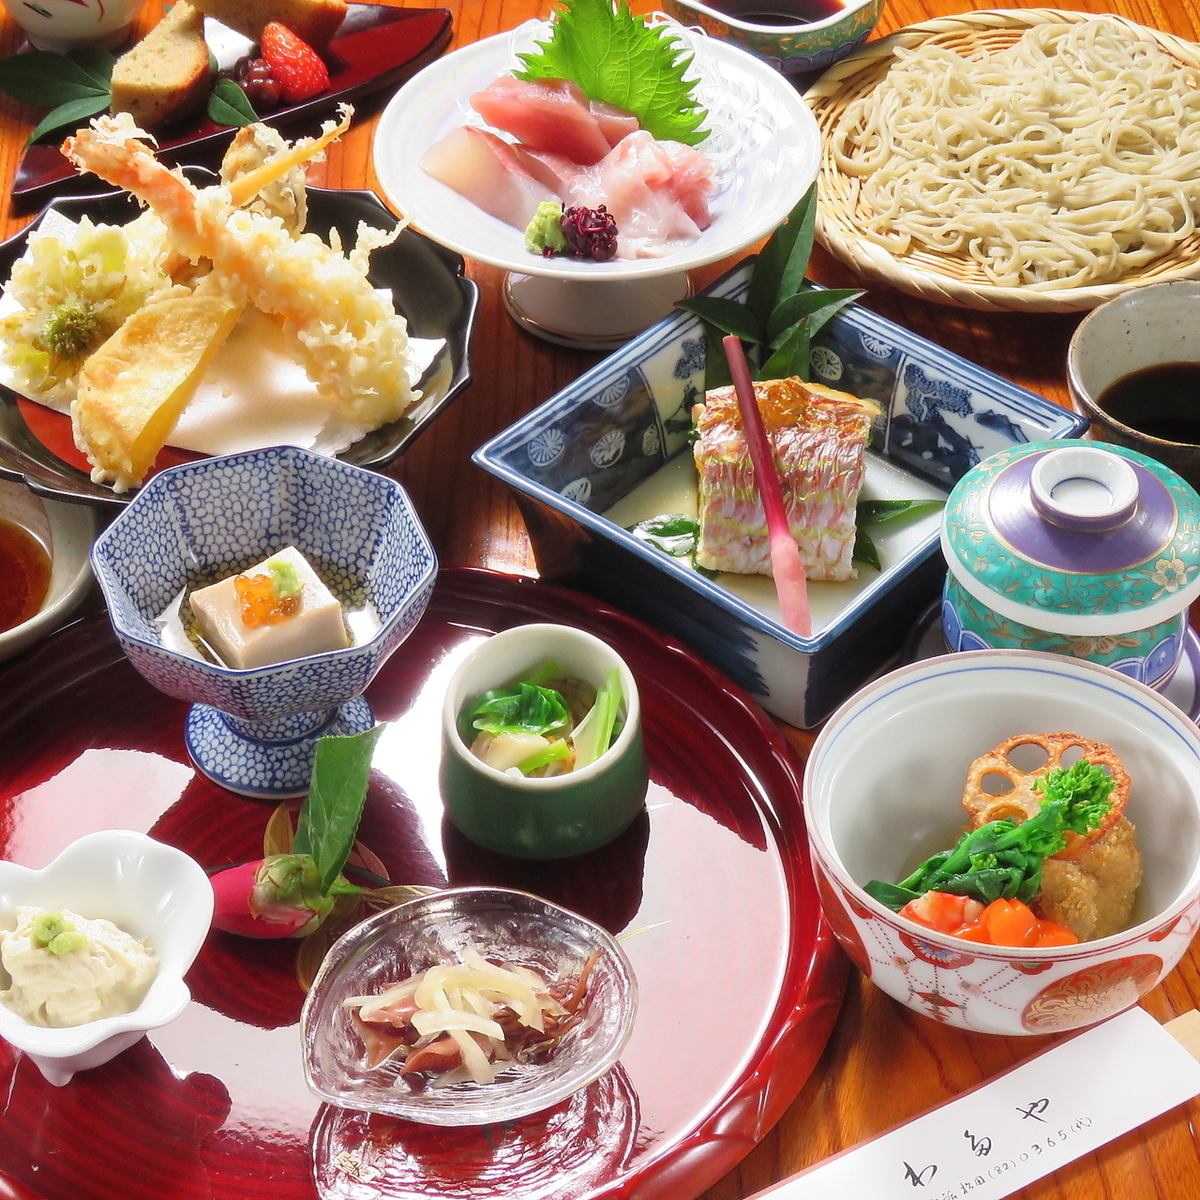 The Japanese-style restaurant has a good atmosphere, making it ideal for dining with family and friends.